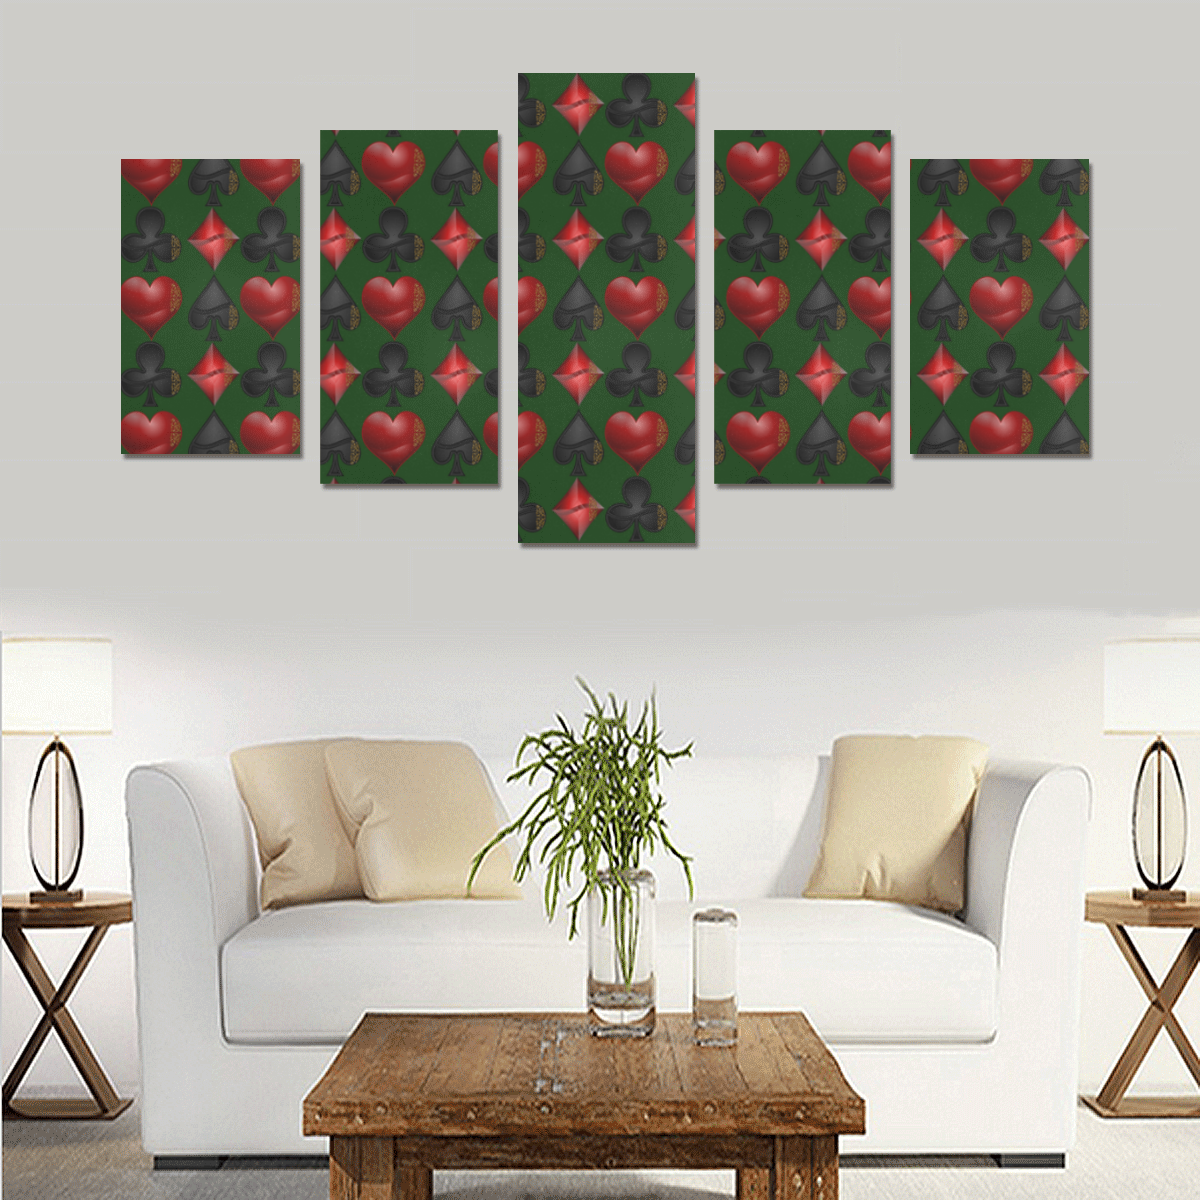 Las Vegas Black and Red Casino Poker Card Shapes on Green Canvas Print Sets C (No Frame)